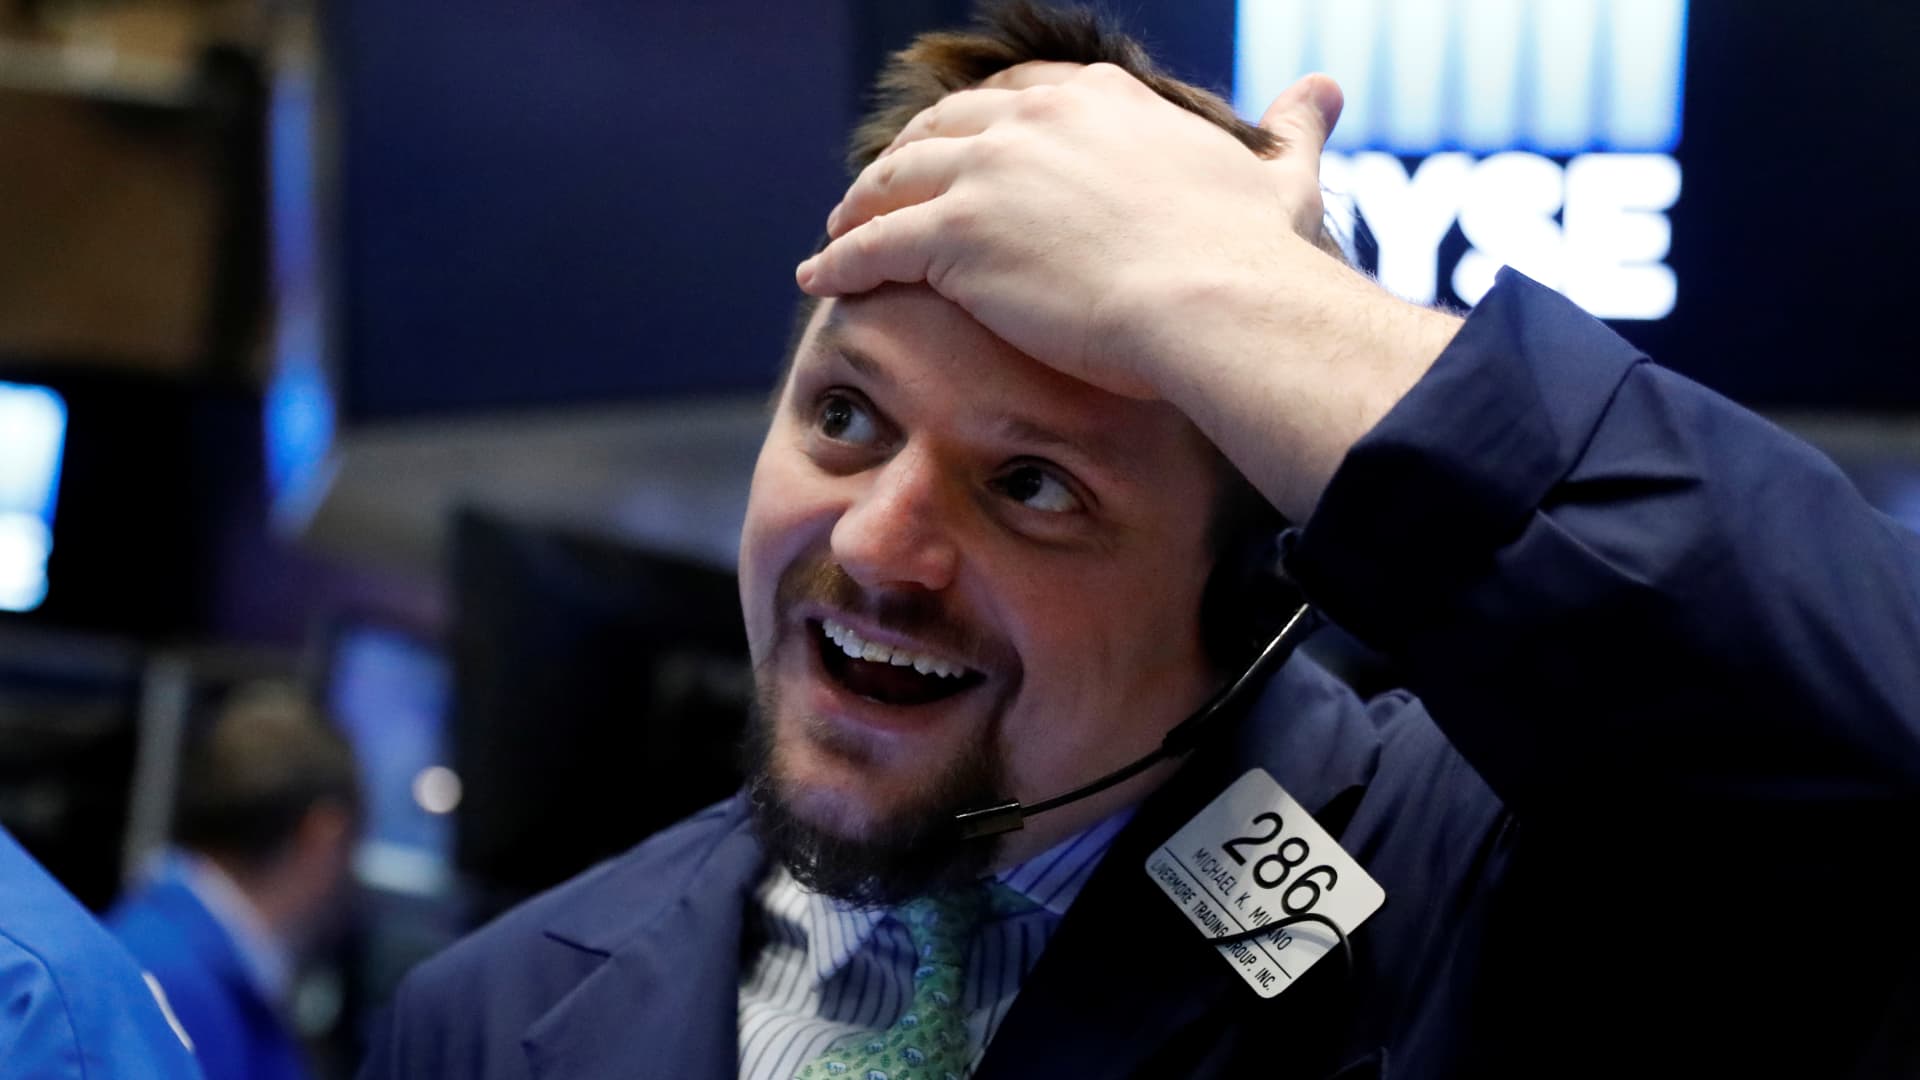 Now that the key yield curve has inverted, here’s what typically happens to stocks next